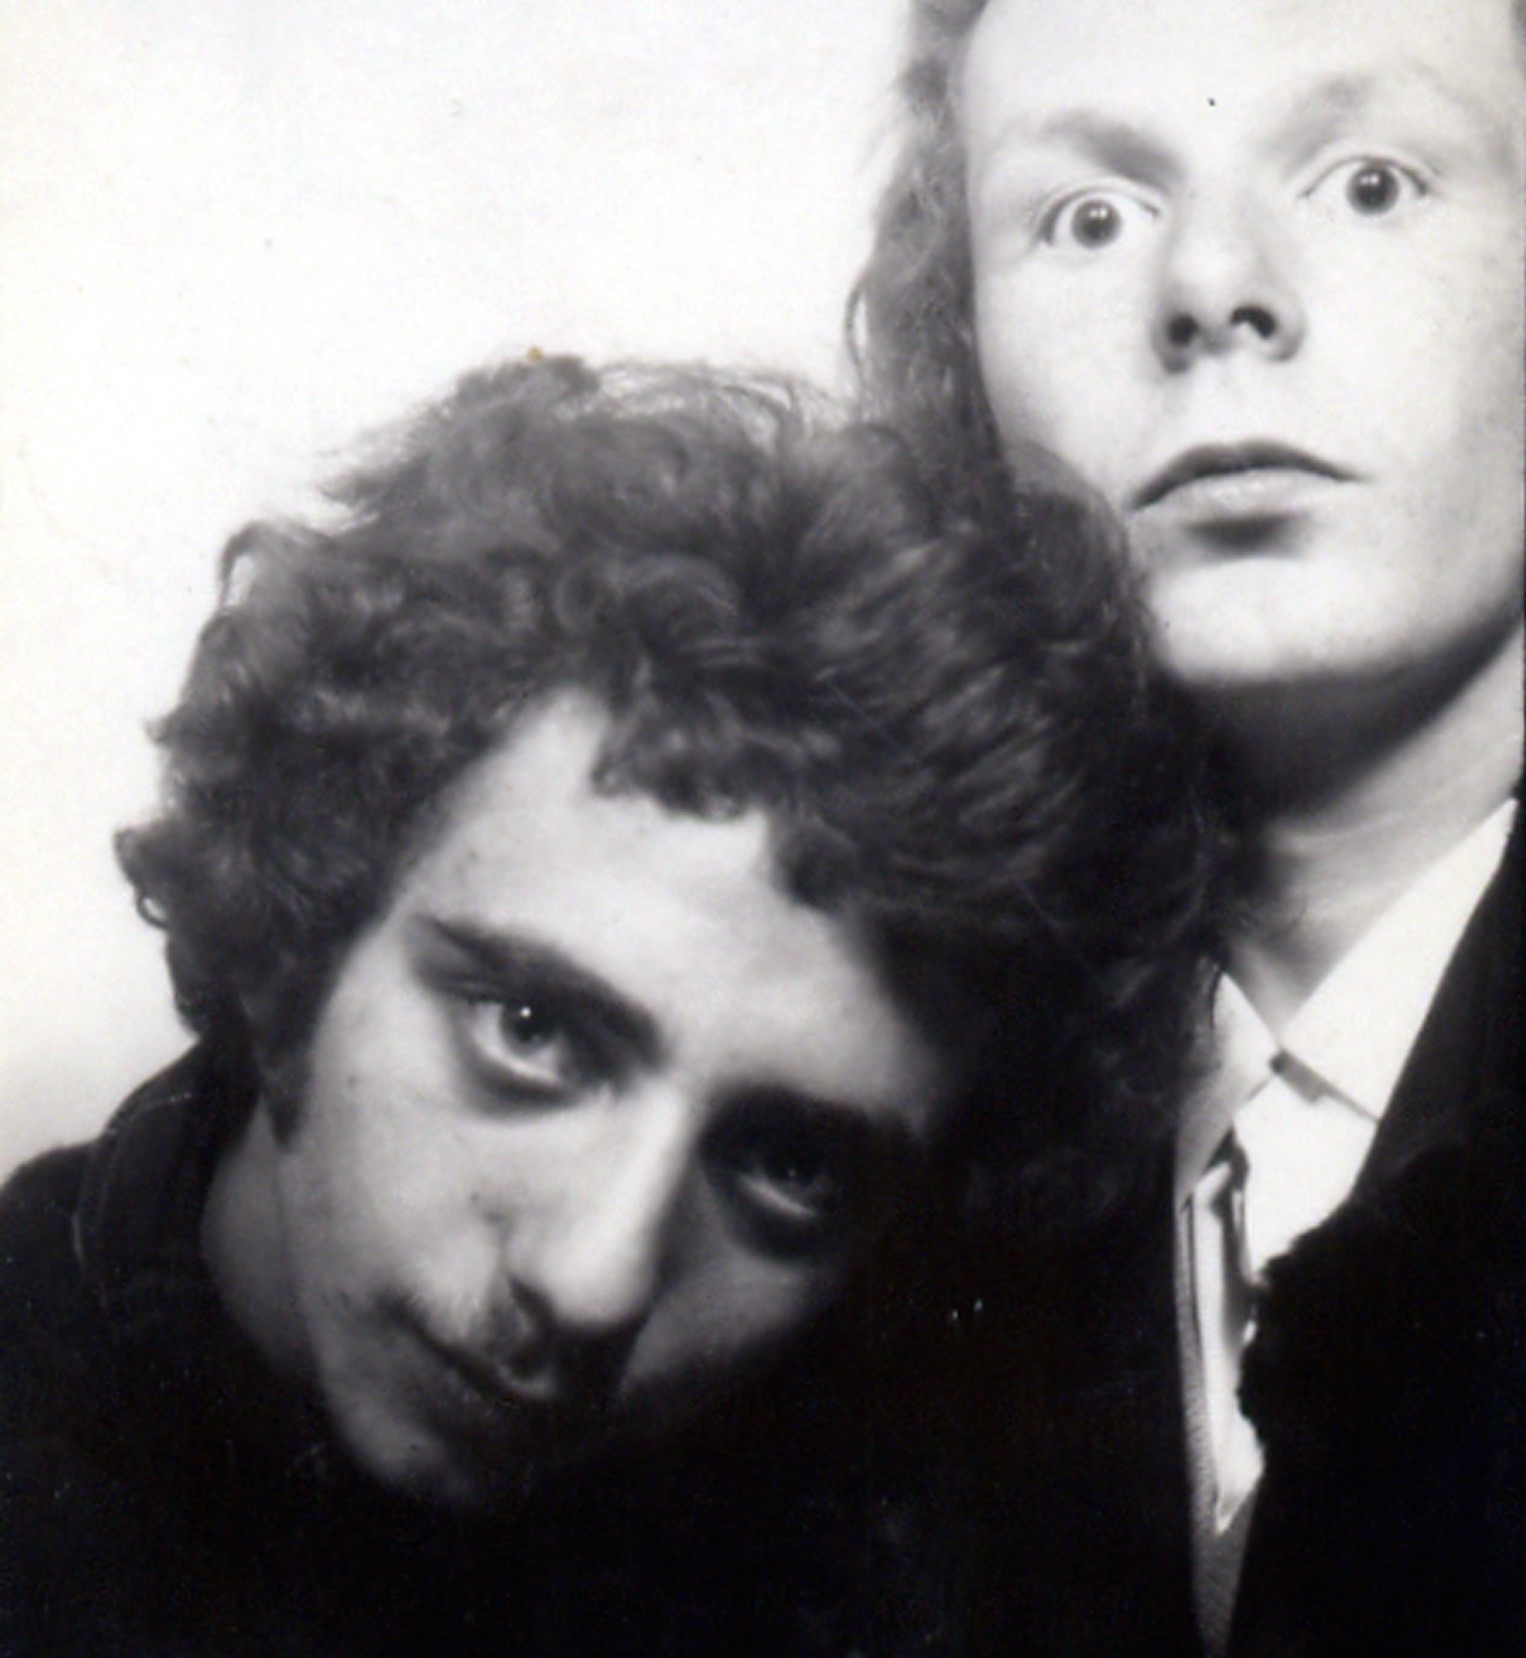 Peter May (right) with lifelong friend Stephen
                  Penn - as teenagers in the 1960s